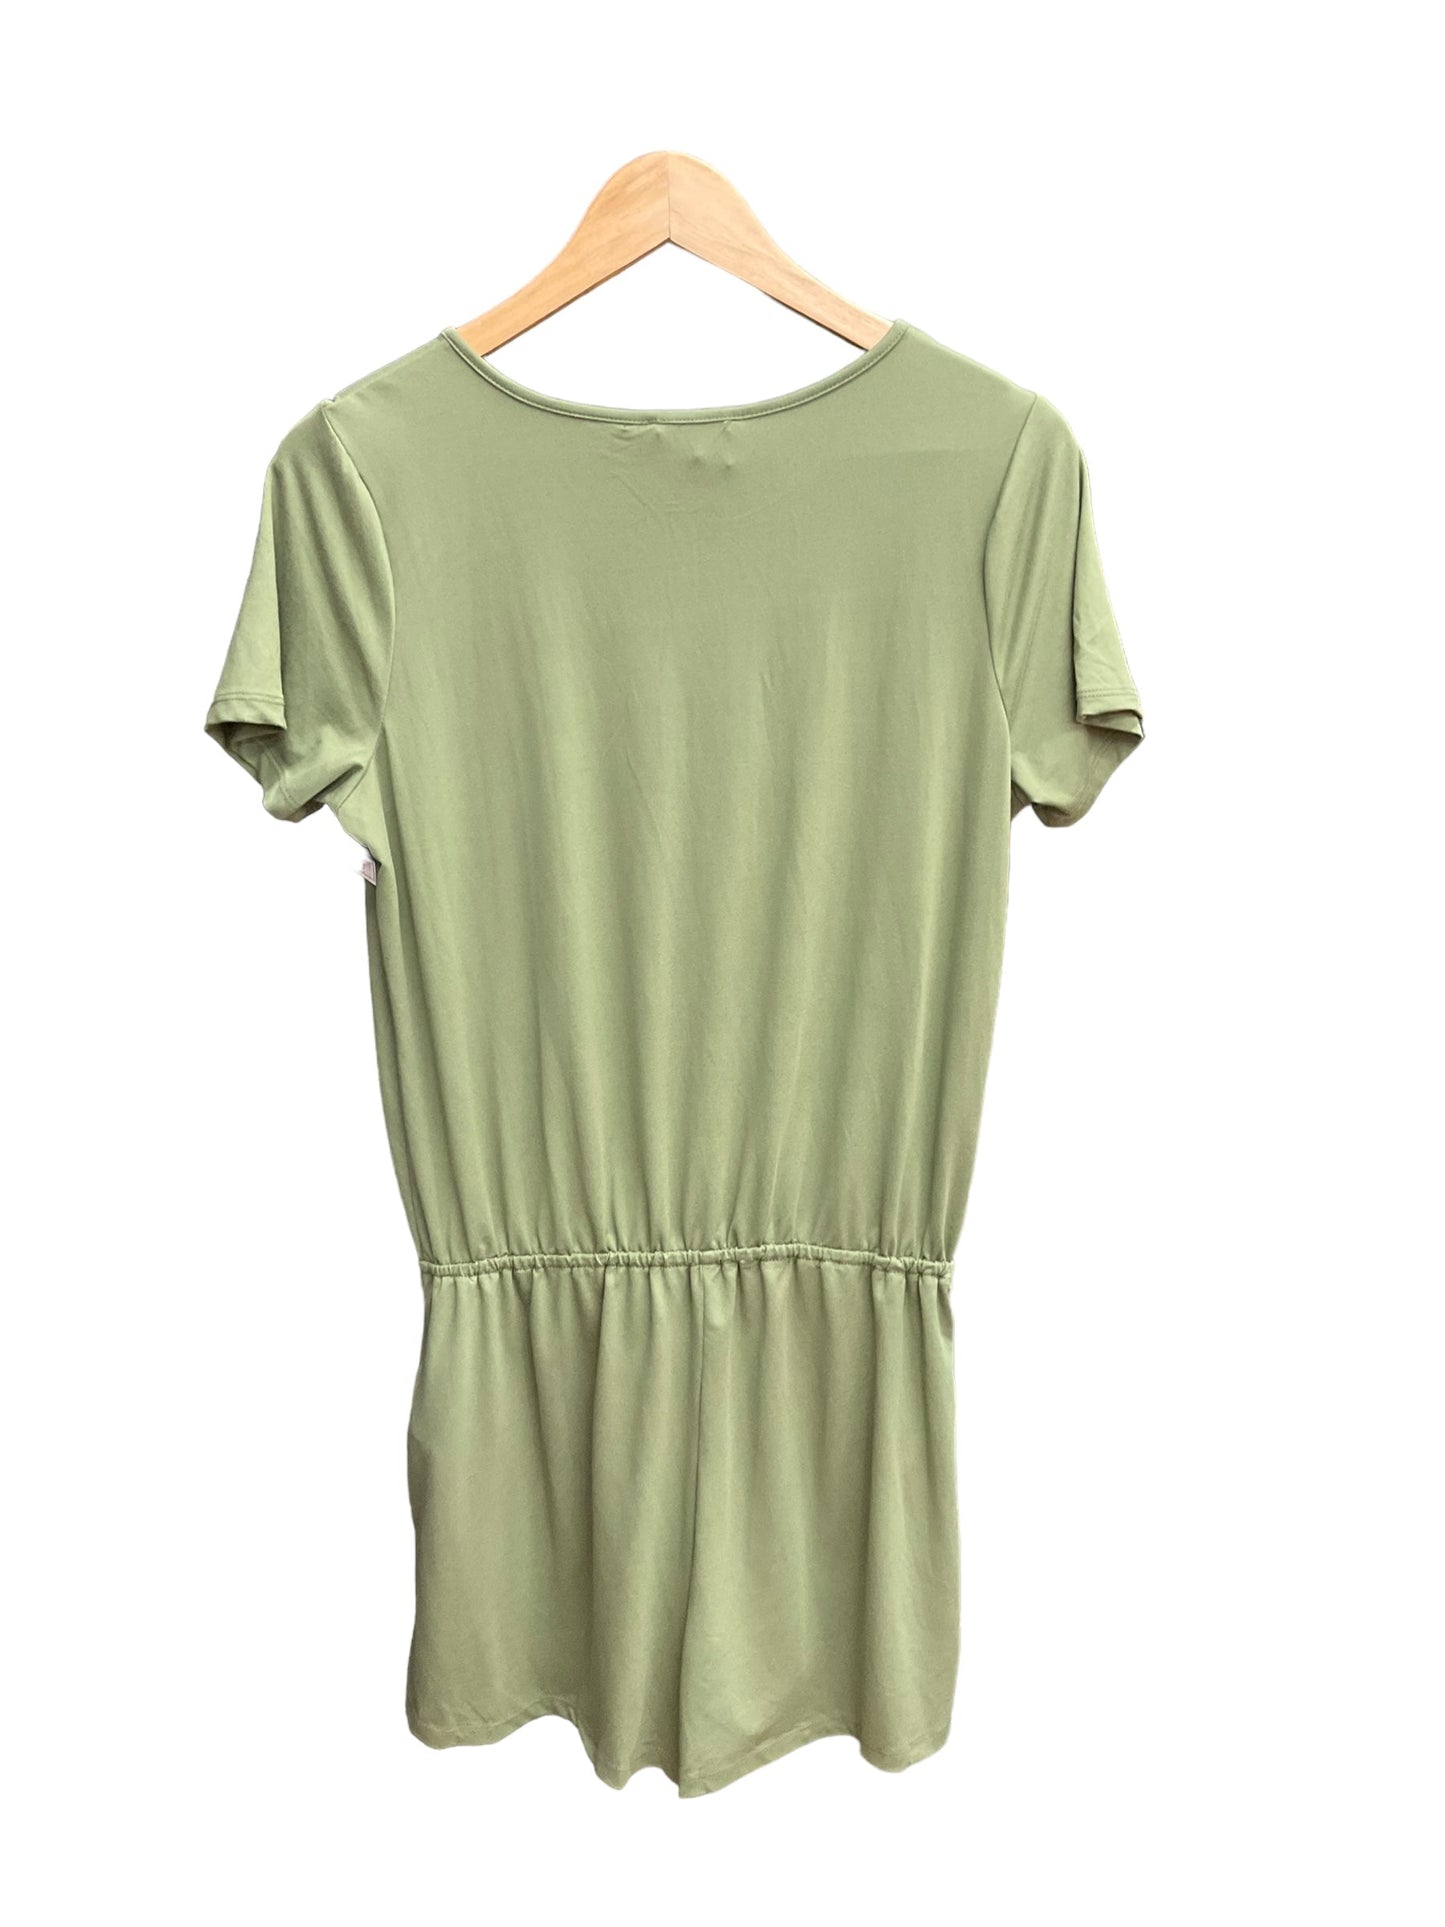 Green Romper Clothes Mentor, Size M